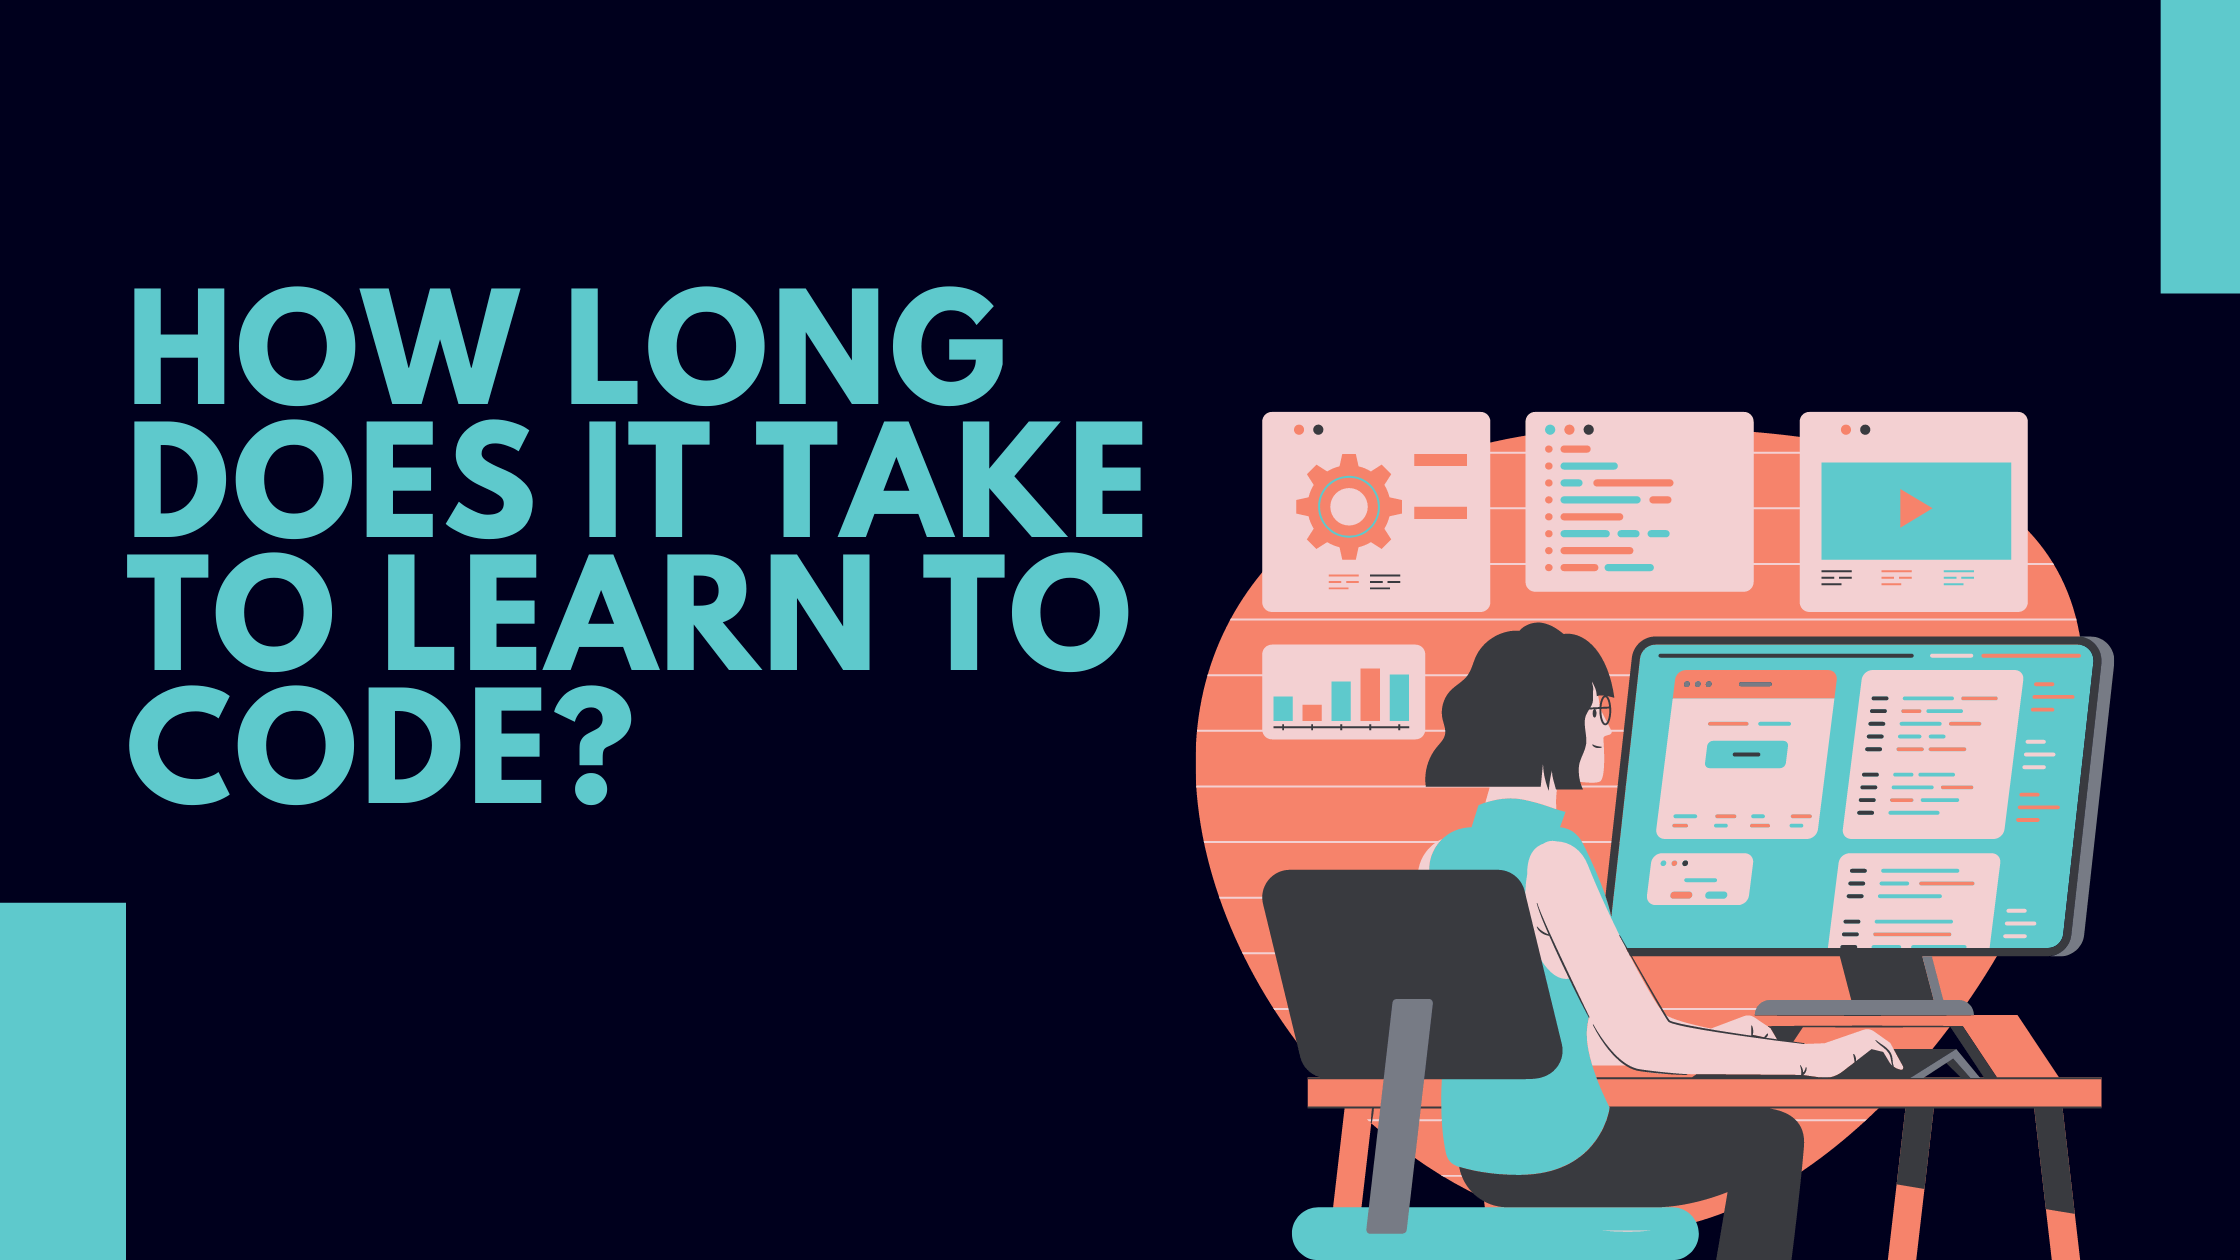 HOW LONG DOES IT TAKE TO CODE